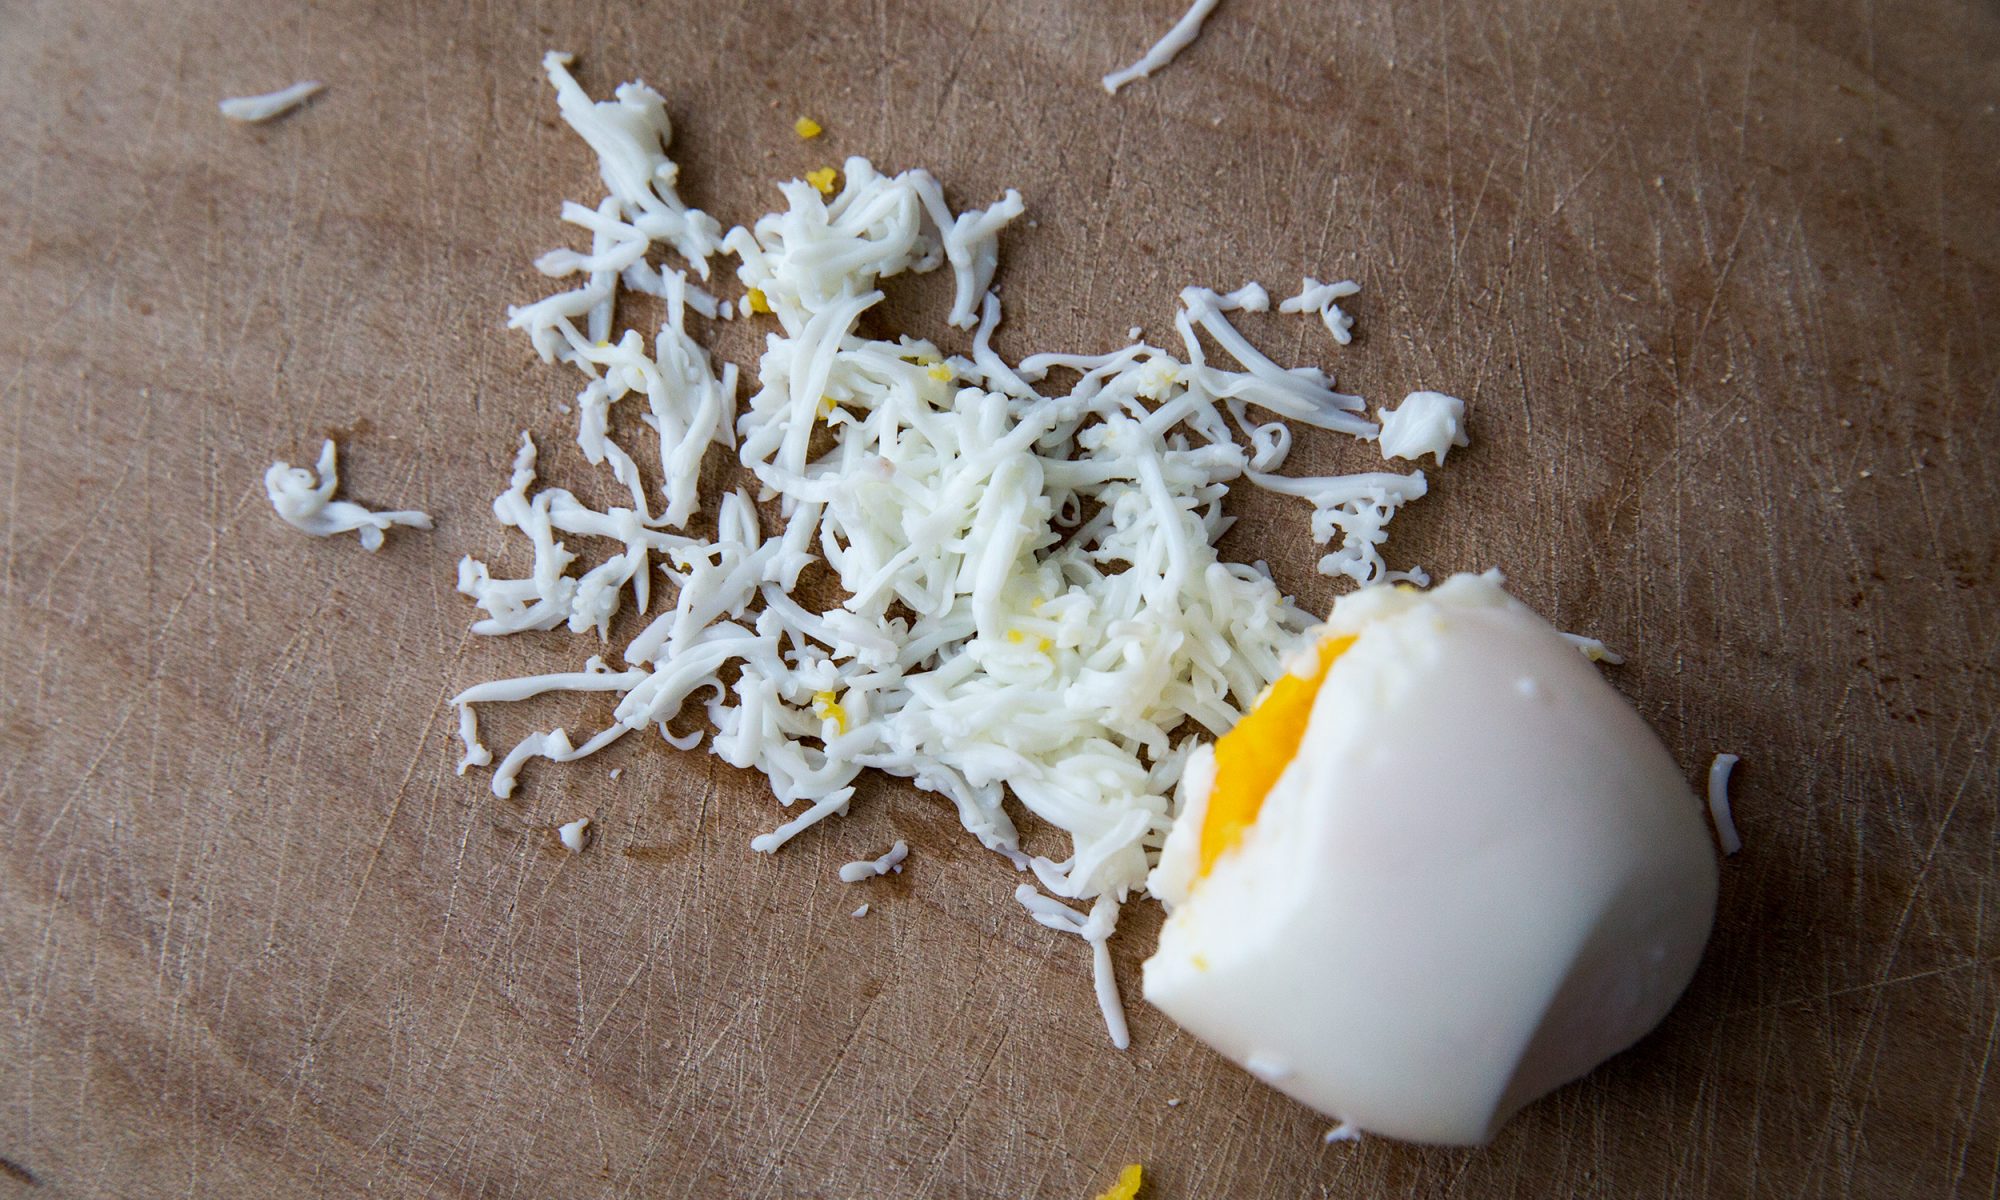 Grating Eggs Tricks Your Brain Into Thinking You Re Eating Cheese Myrecipes